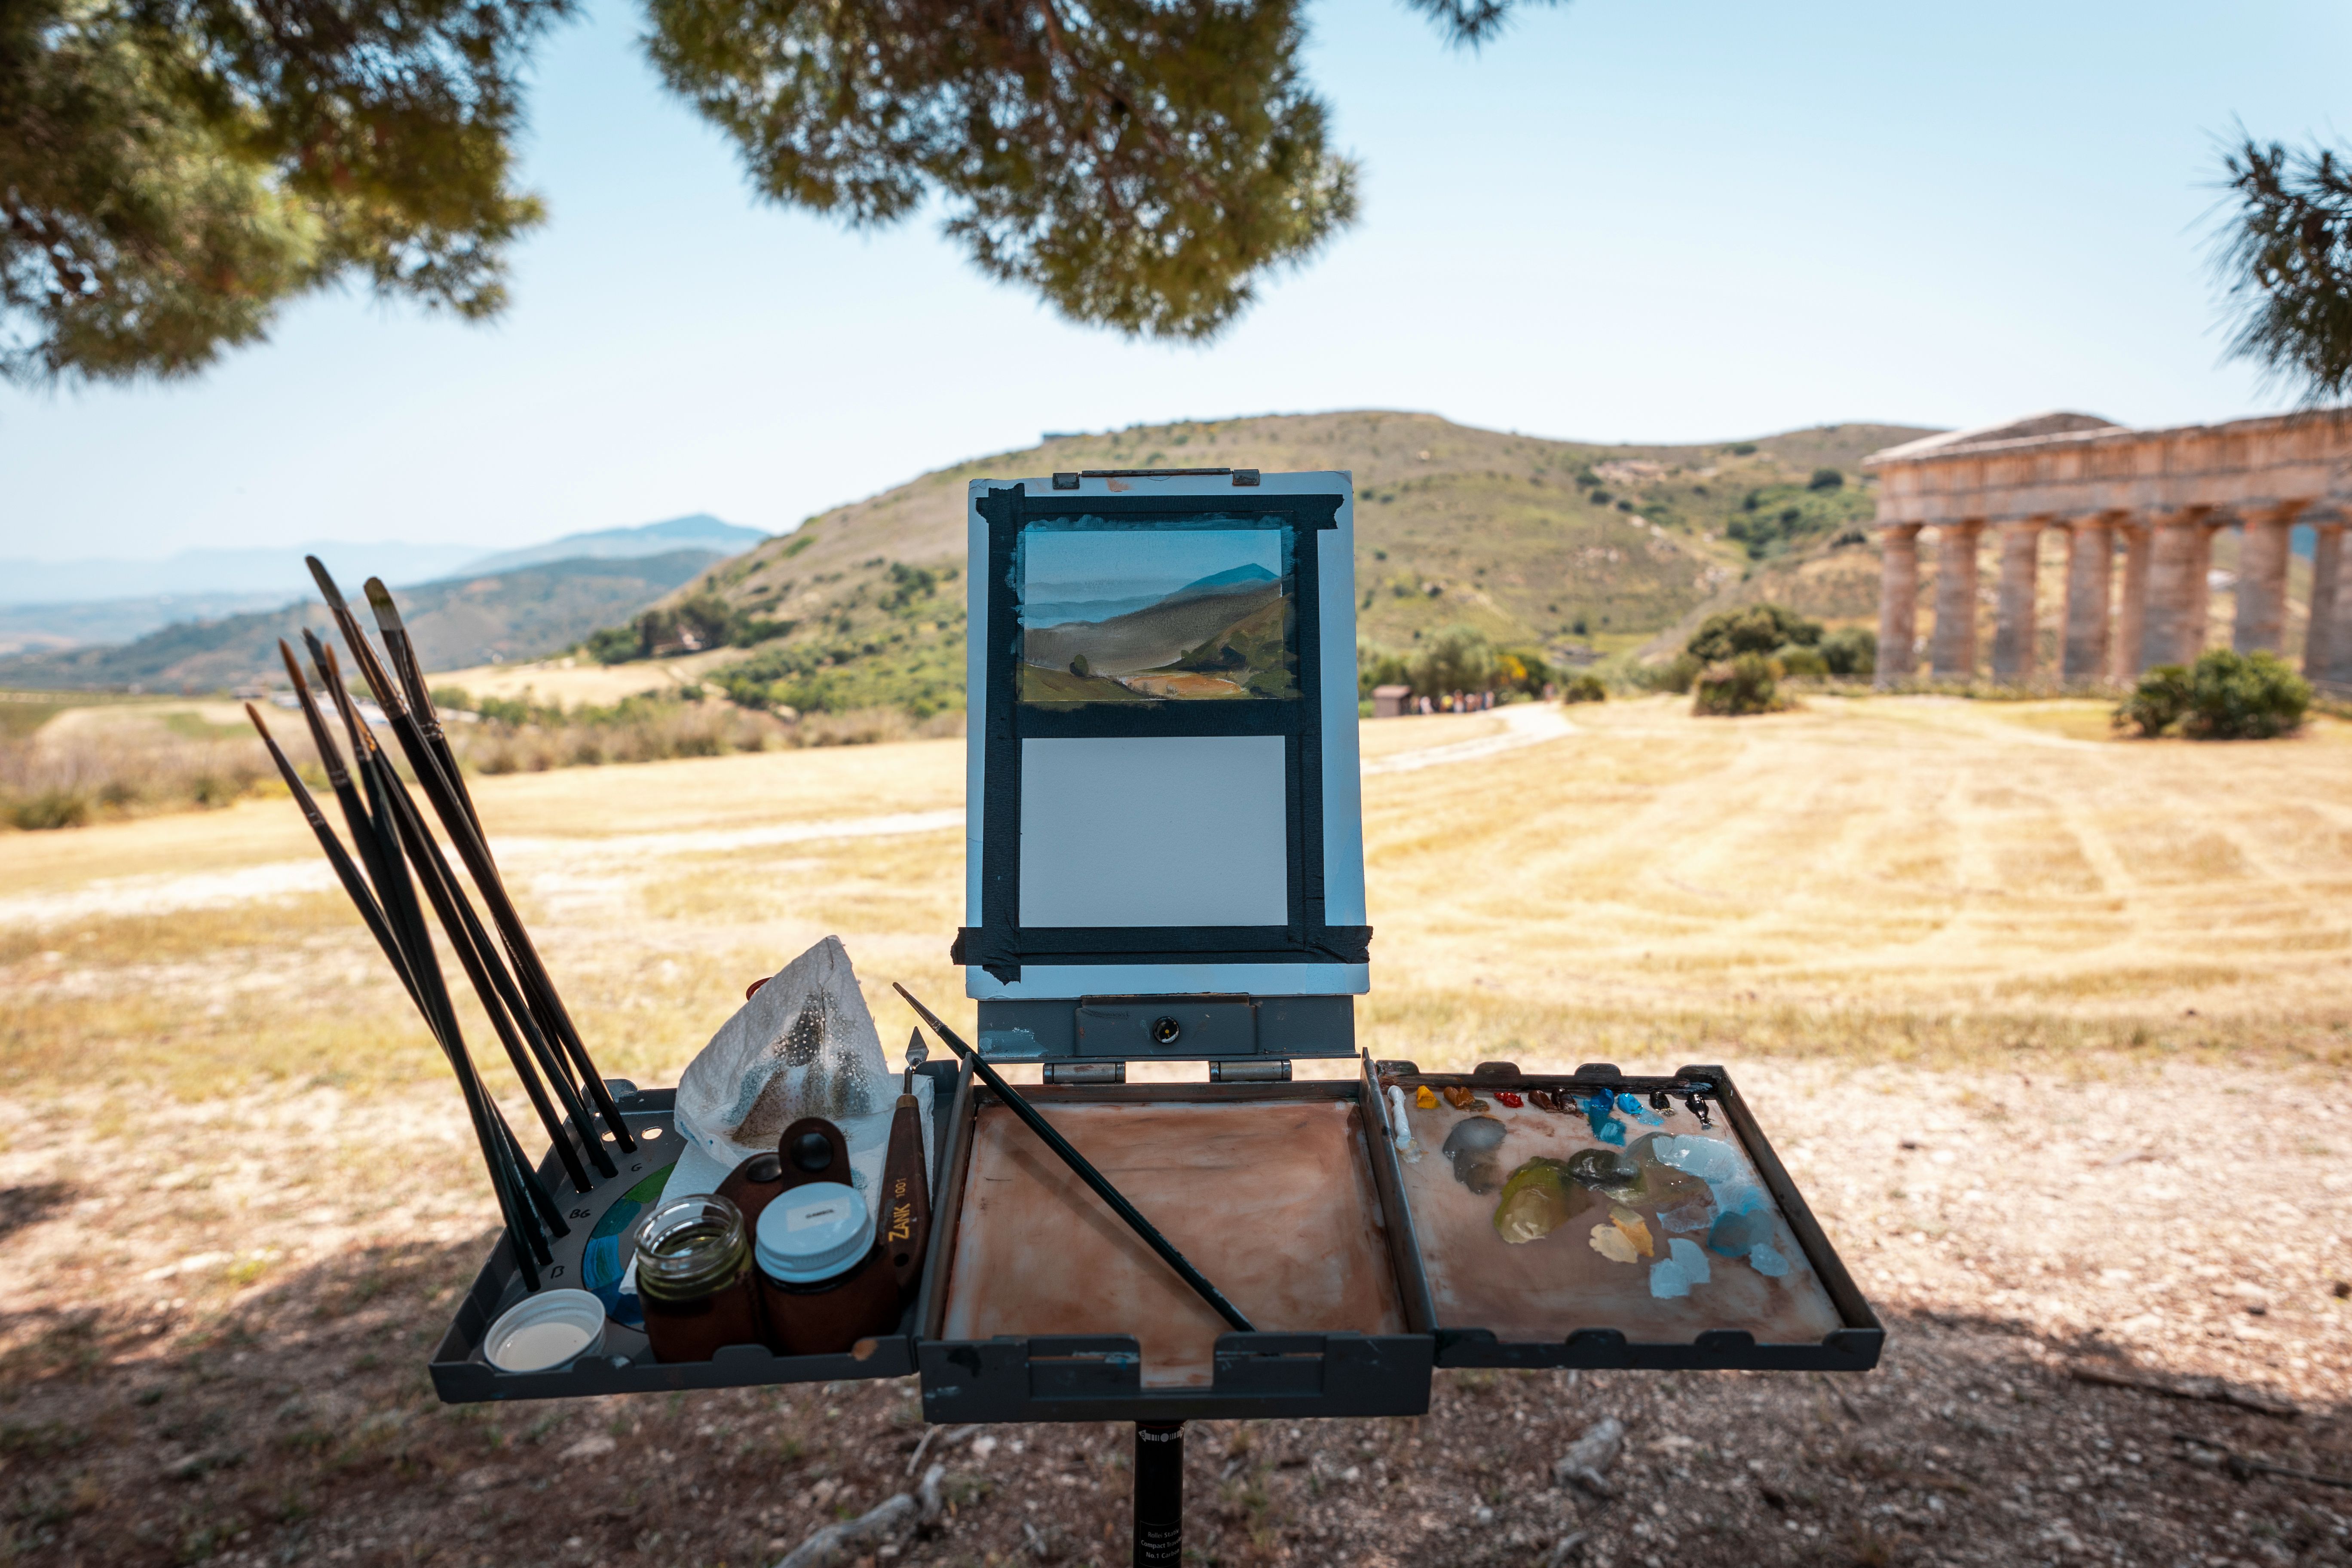 outdoor painting setup by ancient Sicilian building